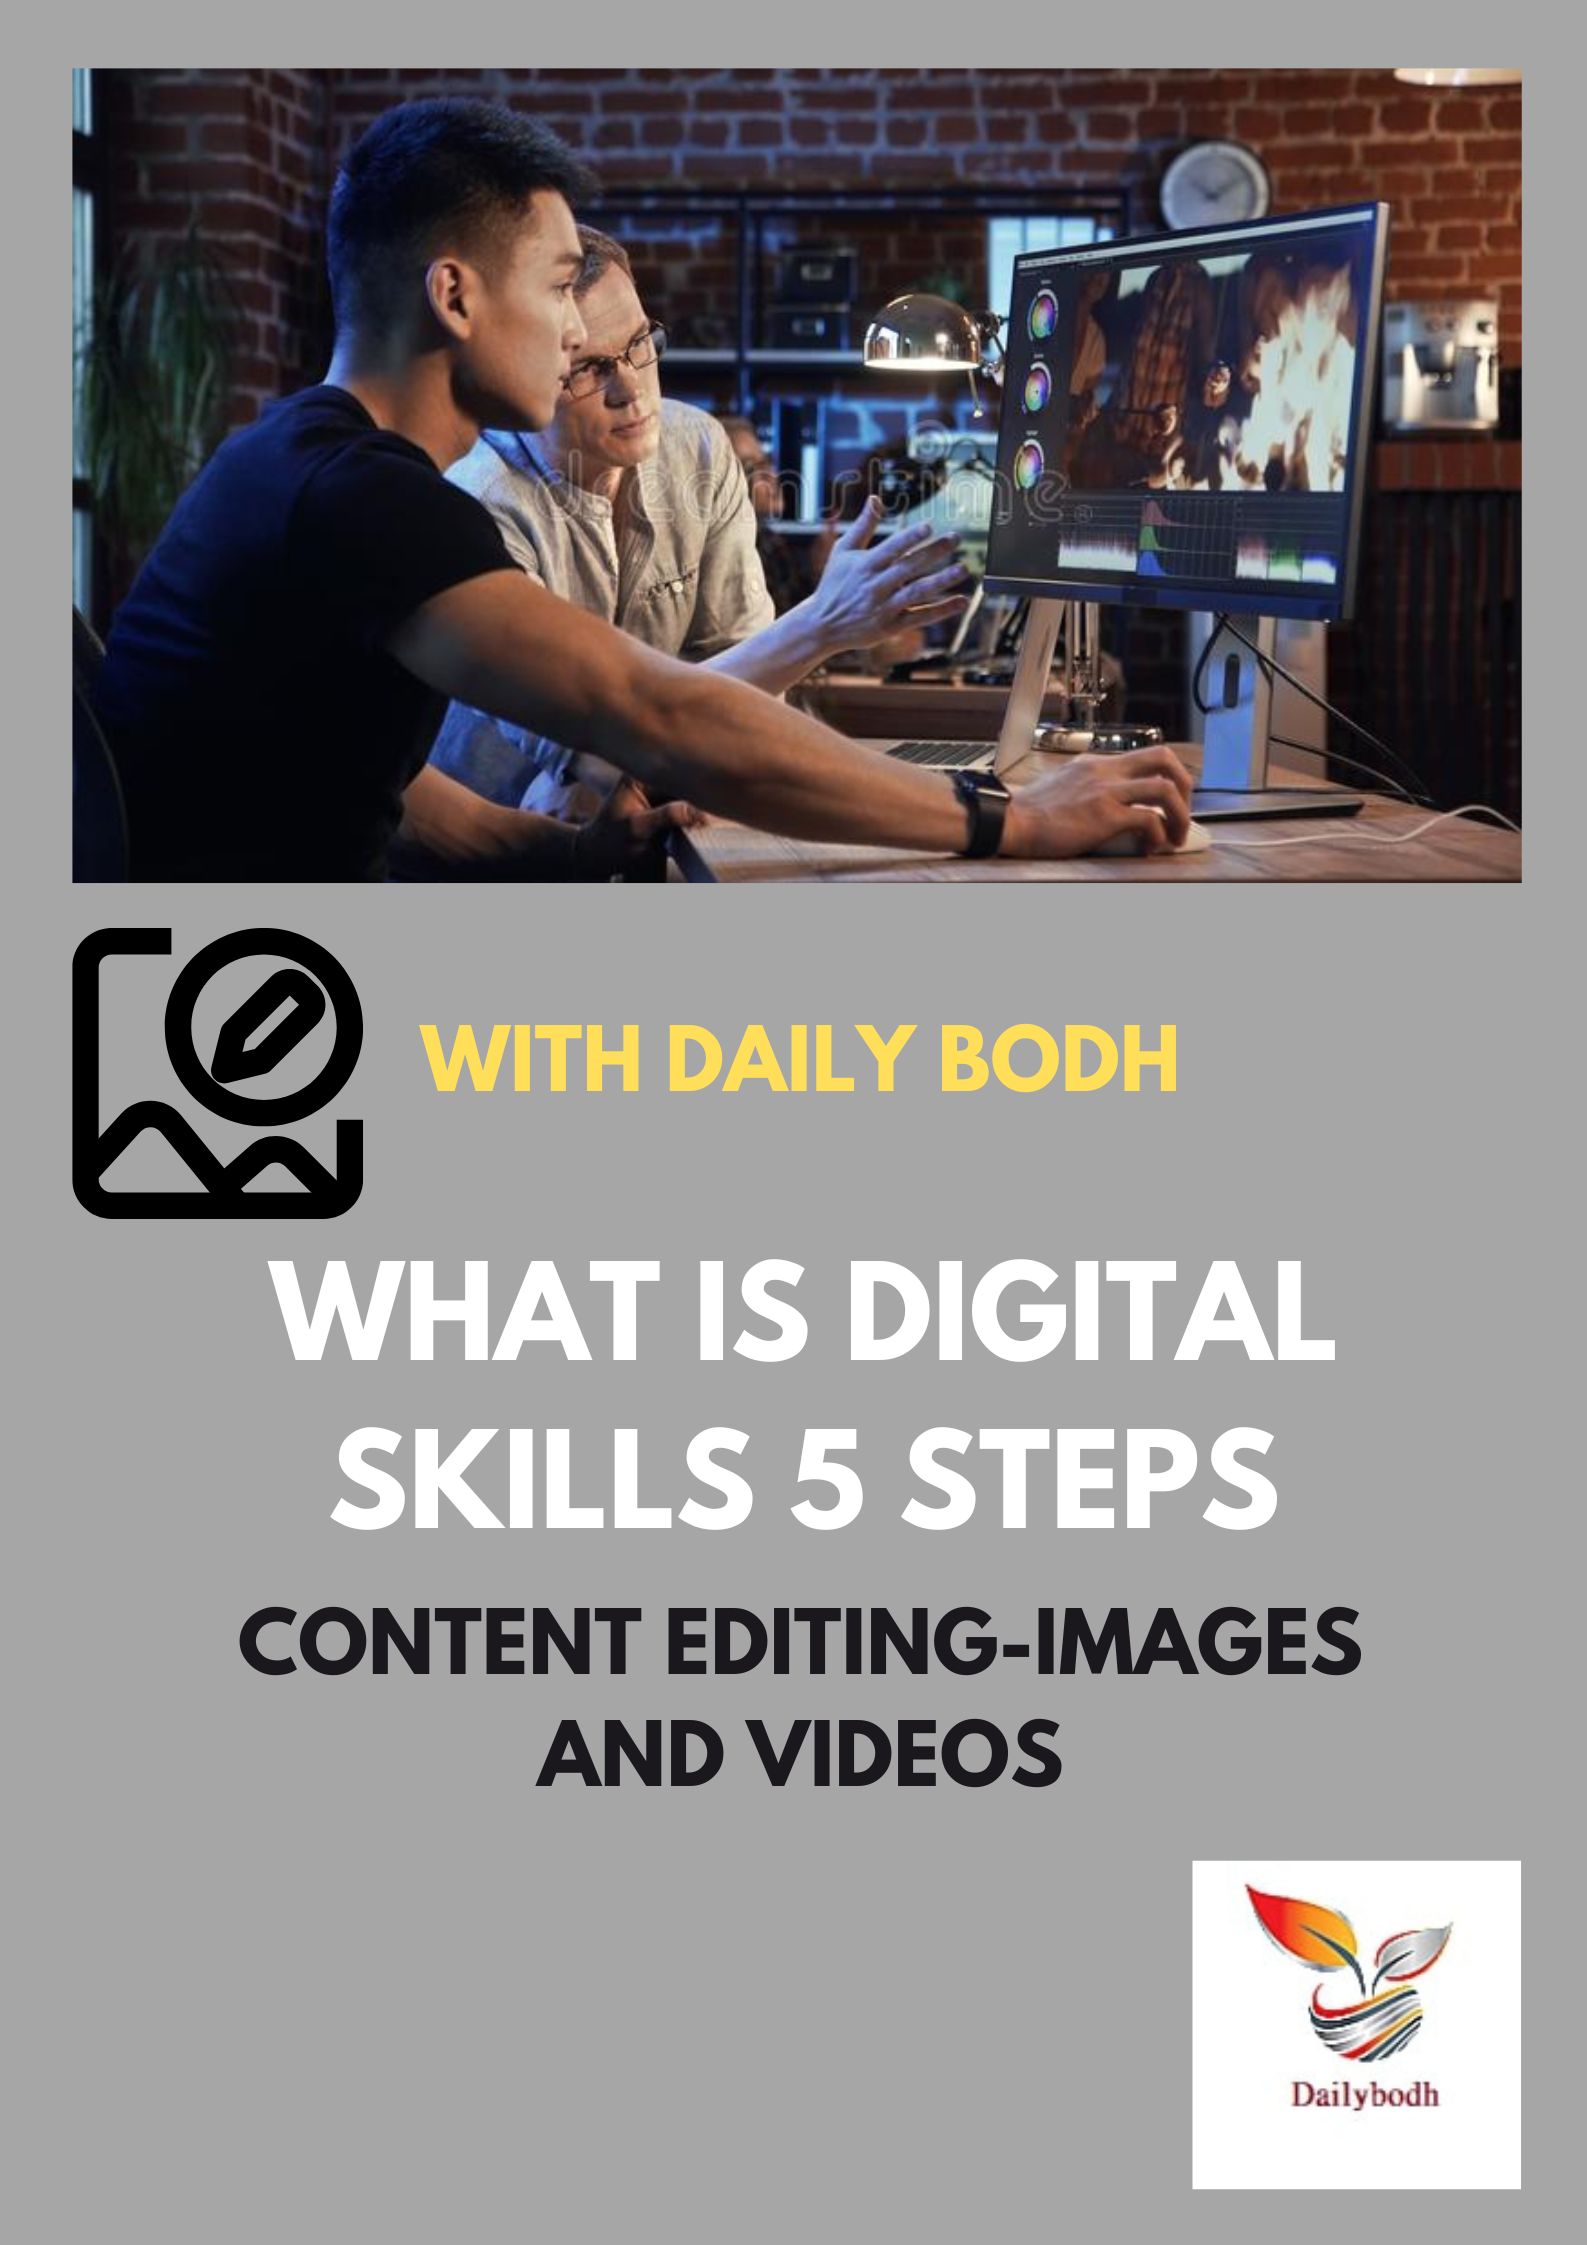 Content editing-Images and Videos (What is Digital Skills)